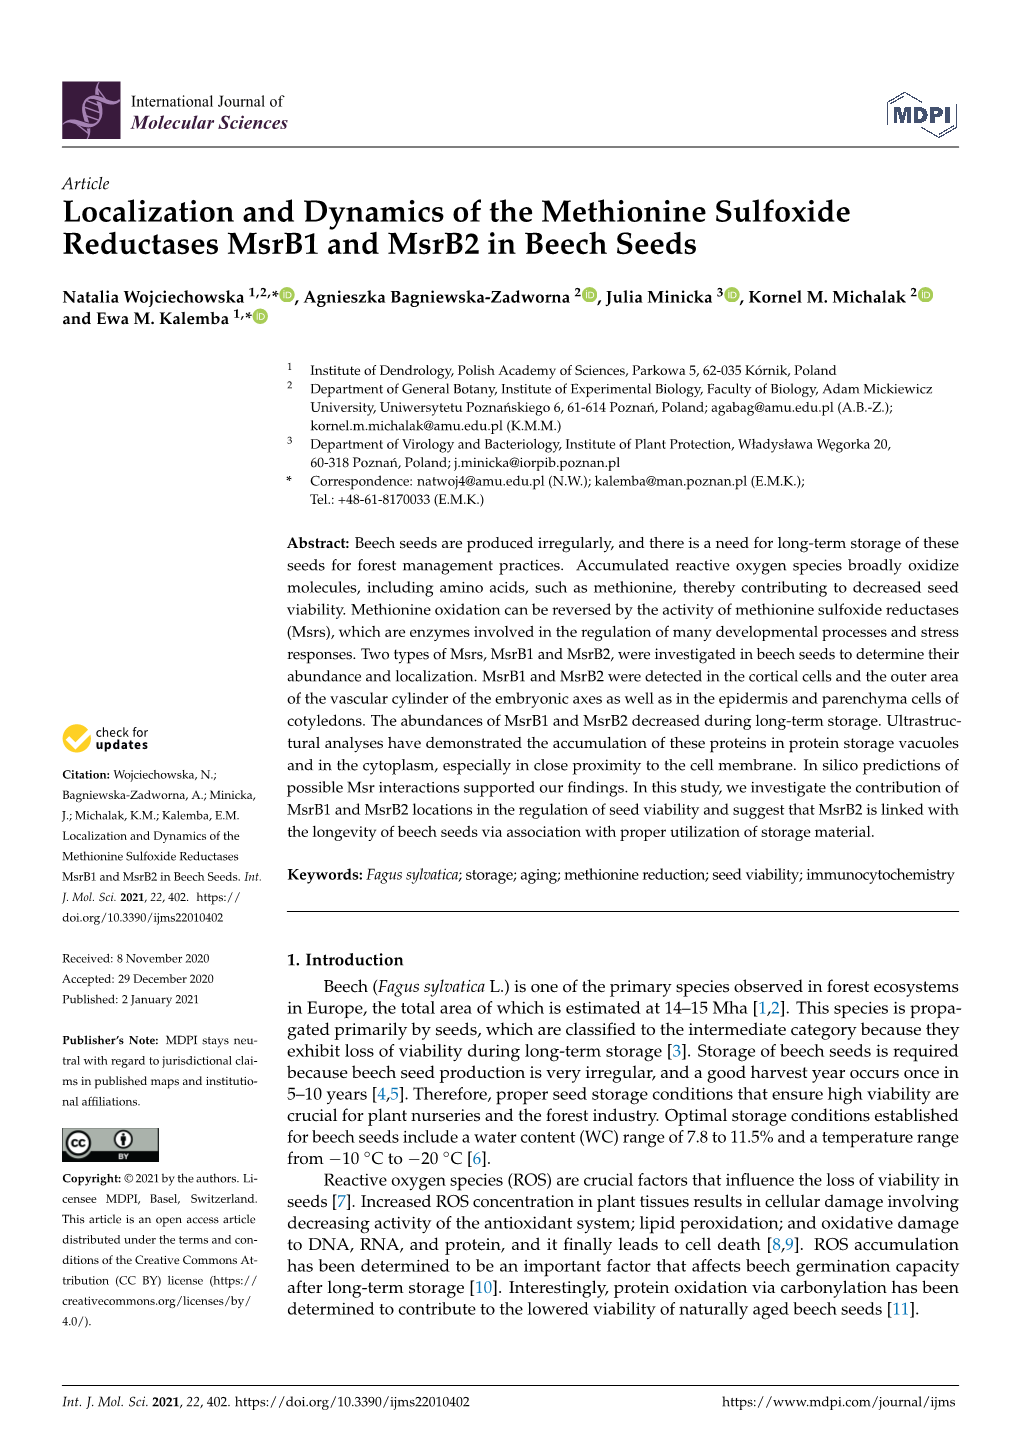 Localization and Dynamics of the Methionine Sulfoxide Reductases Msrb1 and Msrb2 in Beech Seeds